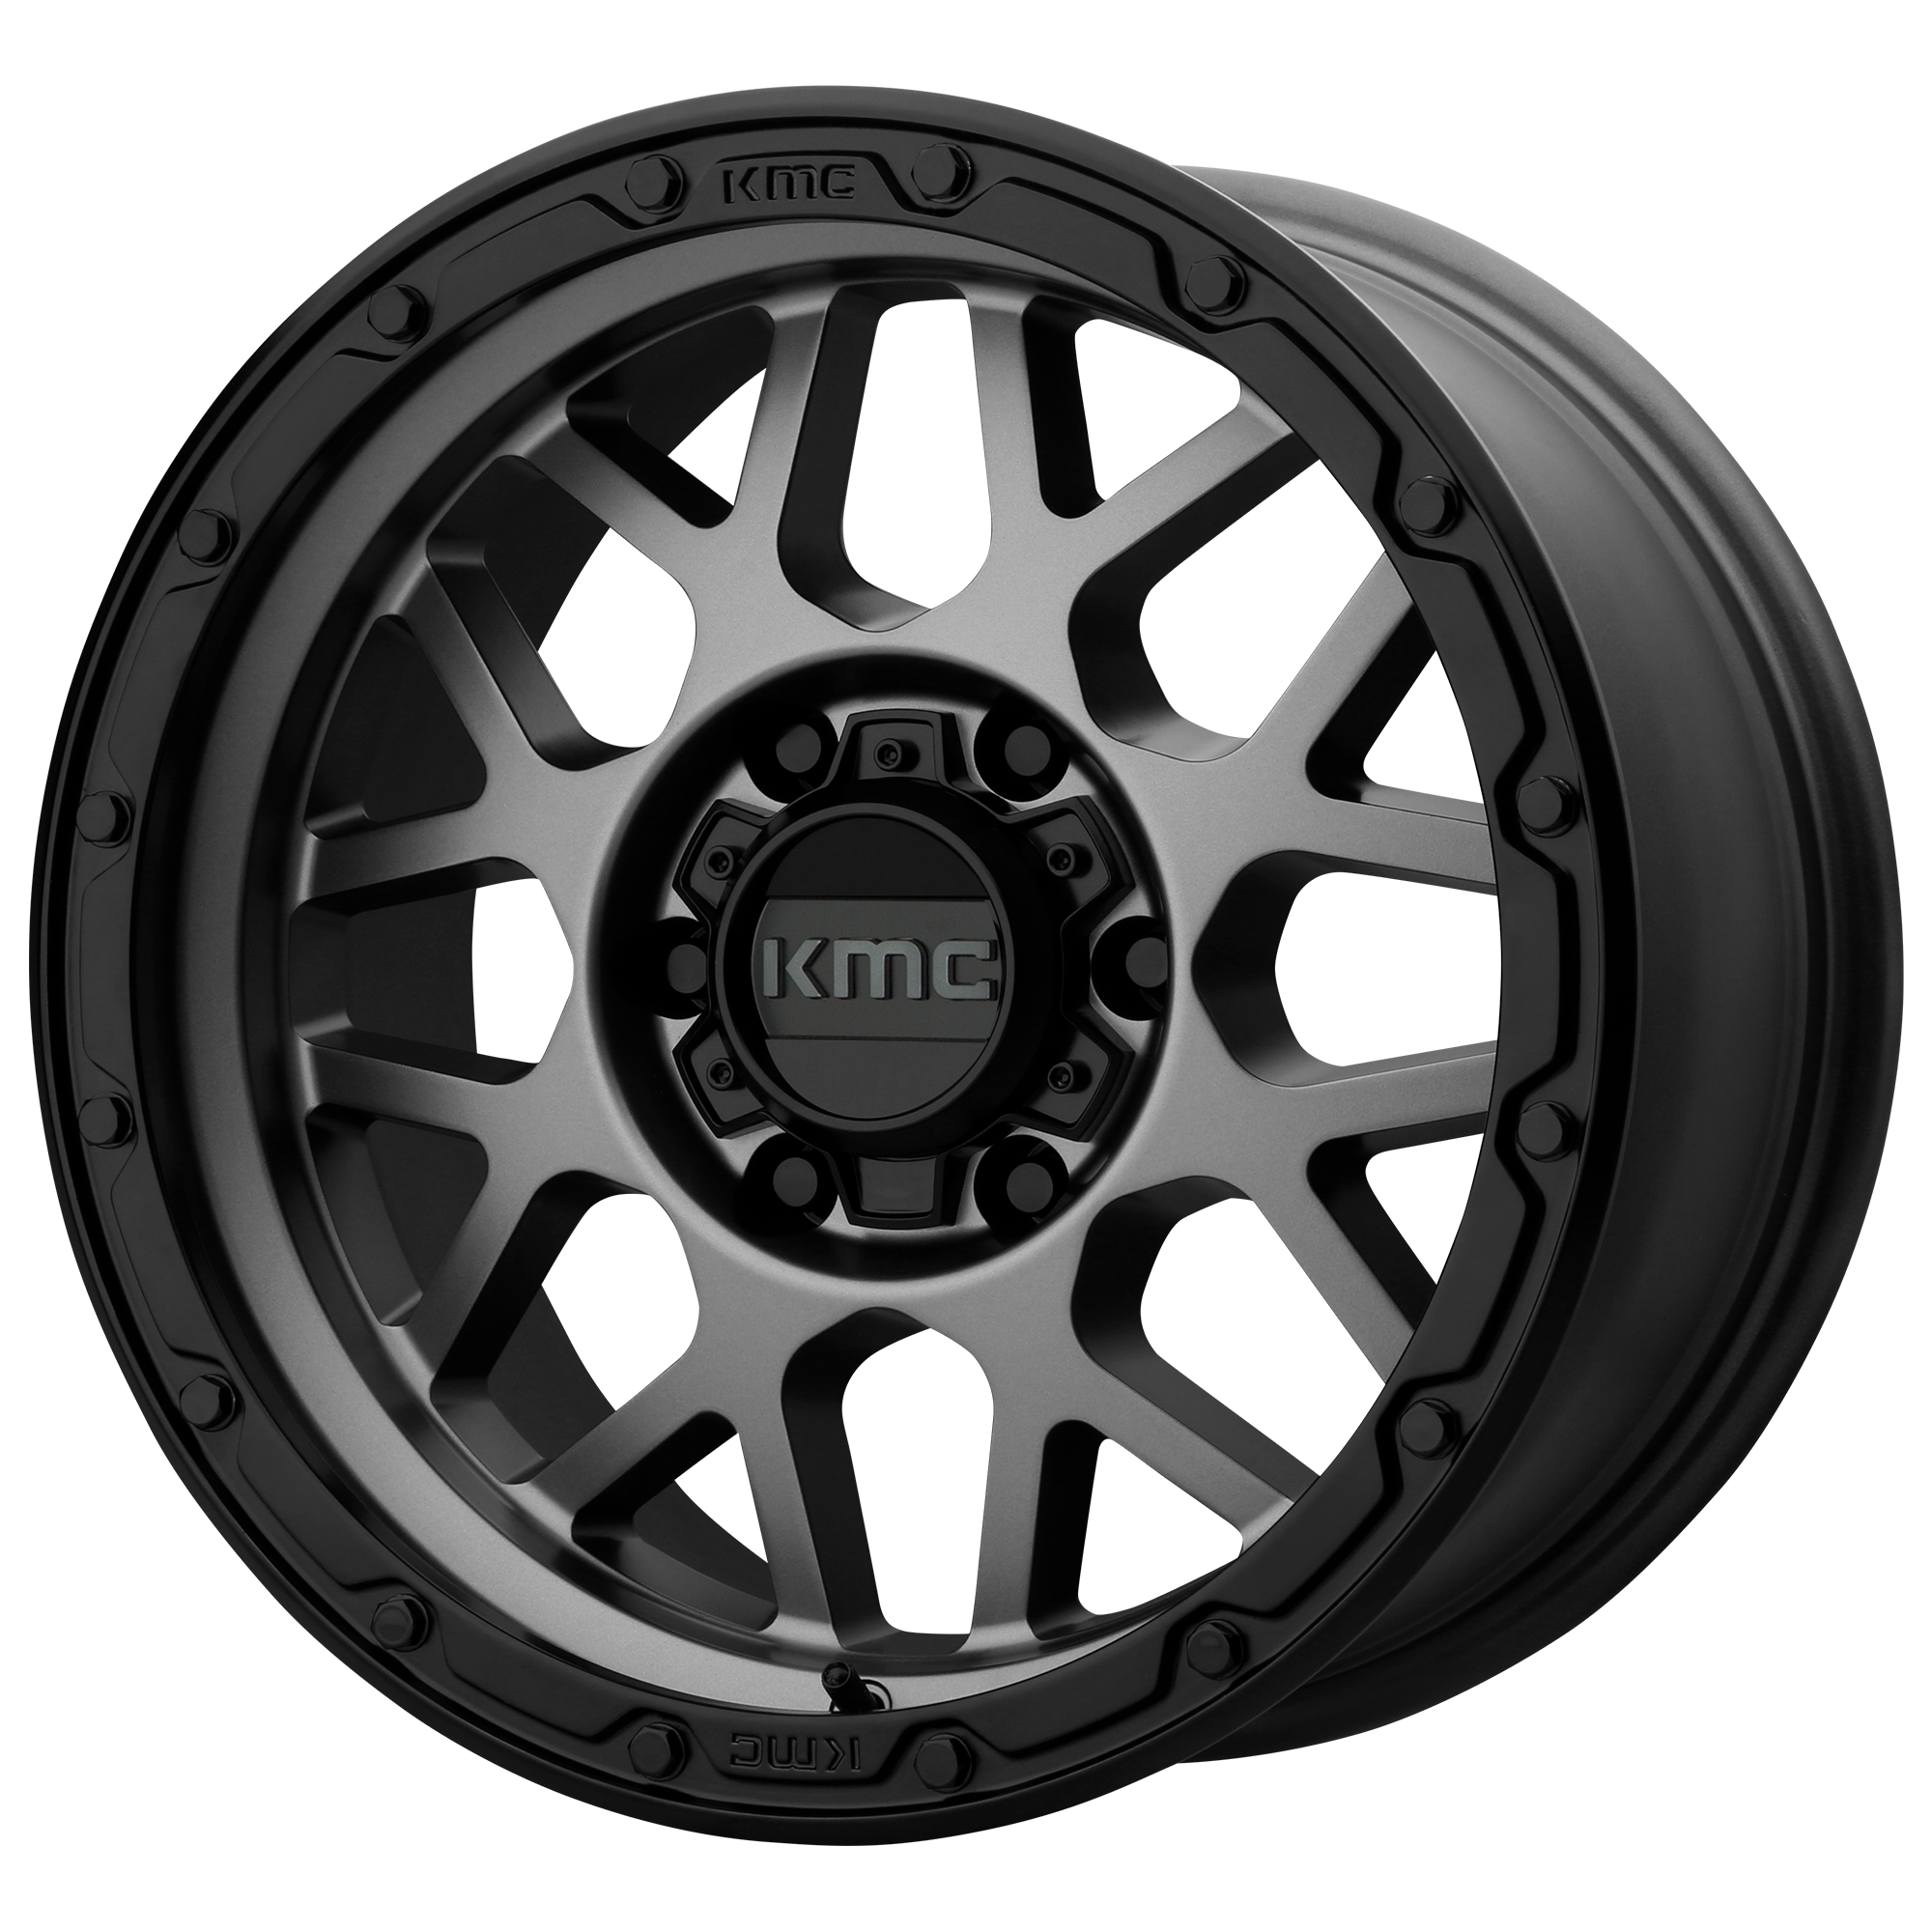 GRENADE OFF-ROAD 17x9 6x114.30 MATTE GRAY W/ MATTE BLACK LIP (18 mm) - Tires and Engine Performance